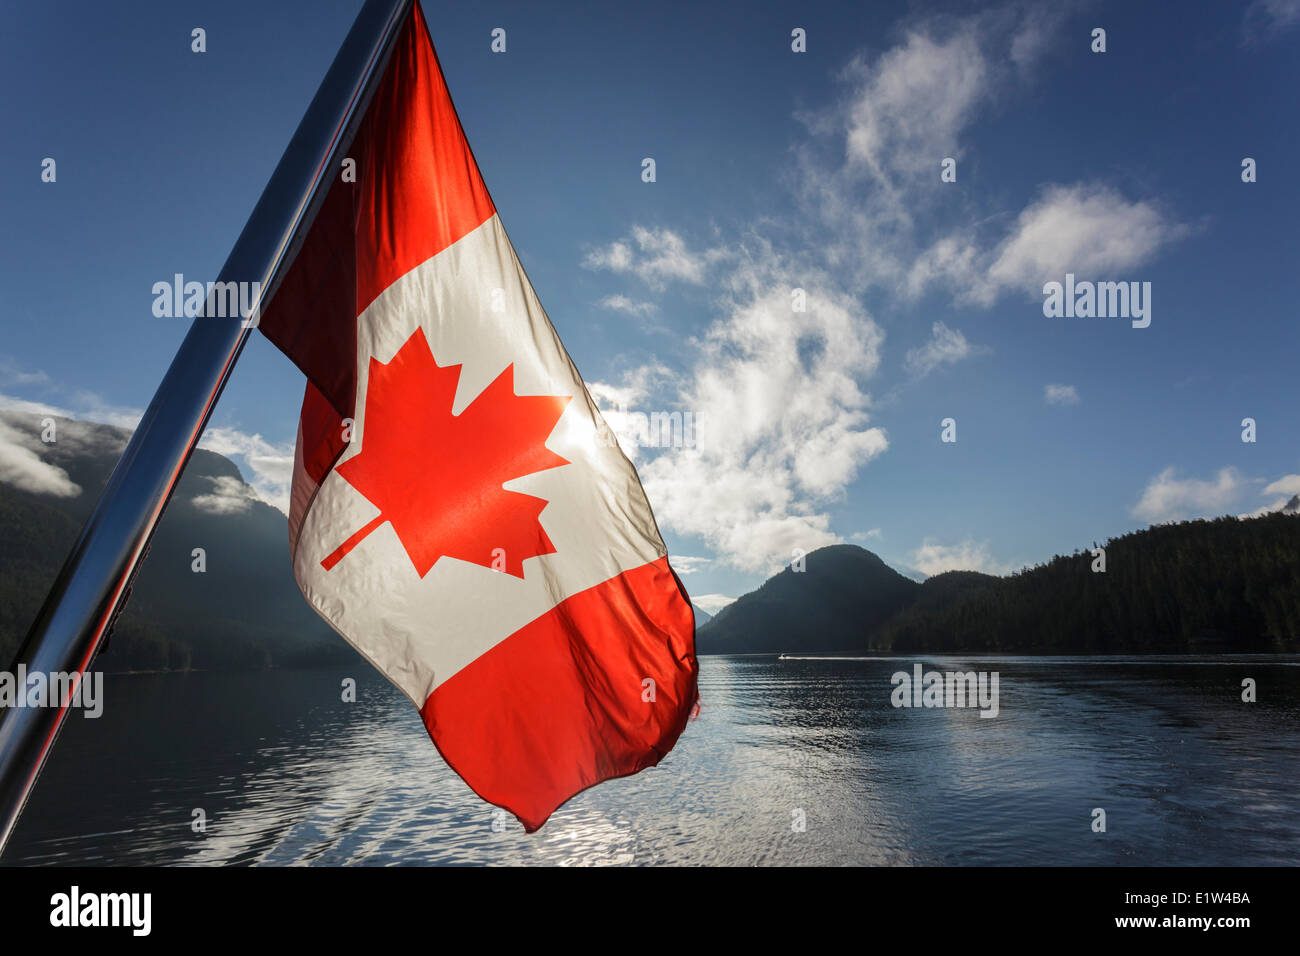 The Canadian Flag flies from the stern of the Uchuck 111 as it traverses Muchalat Inlet, British Columbia, Canada. Stock Photo